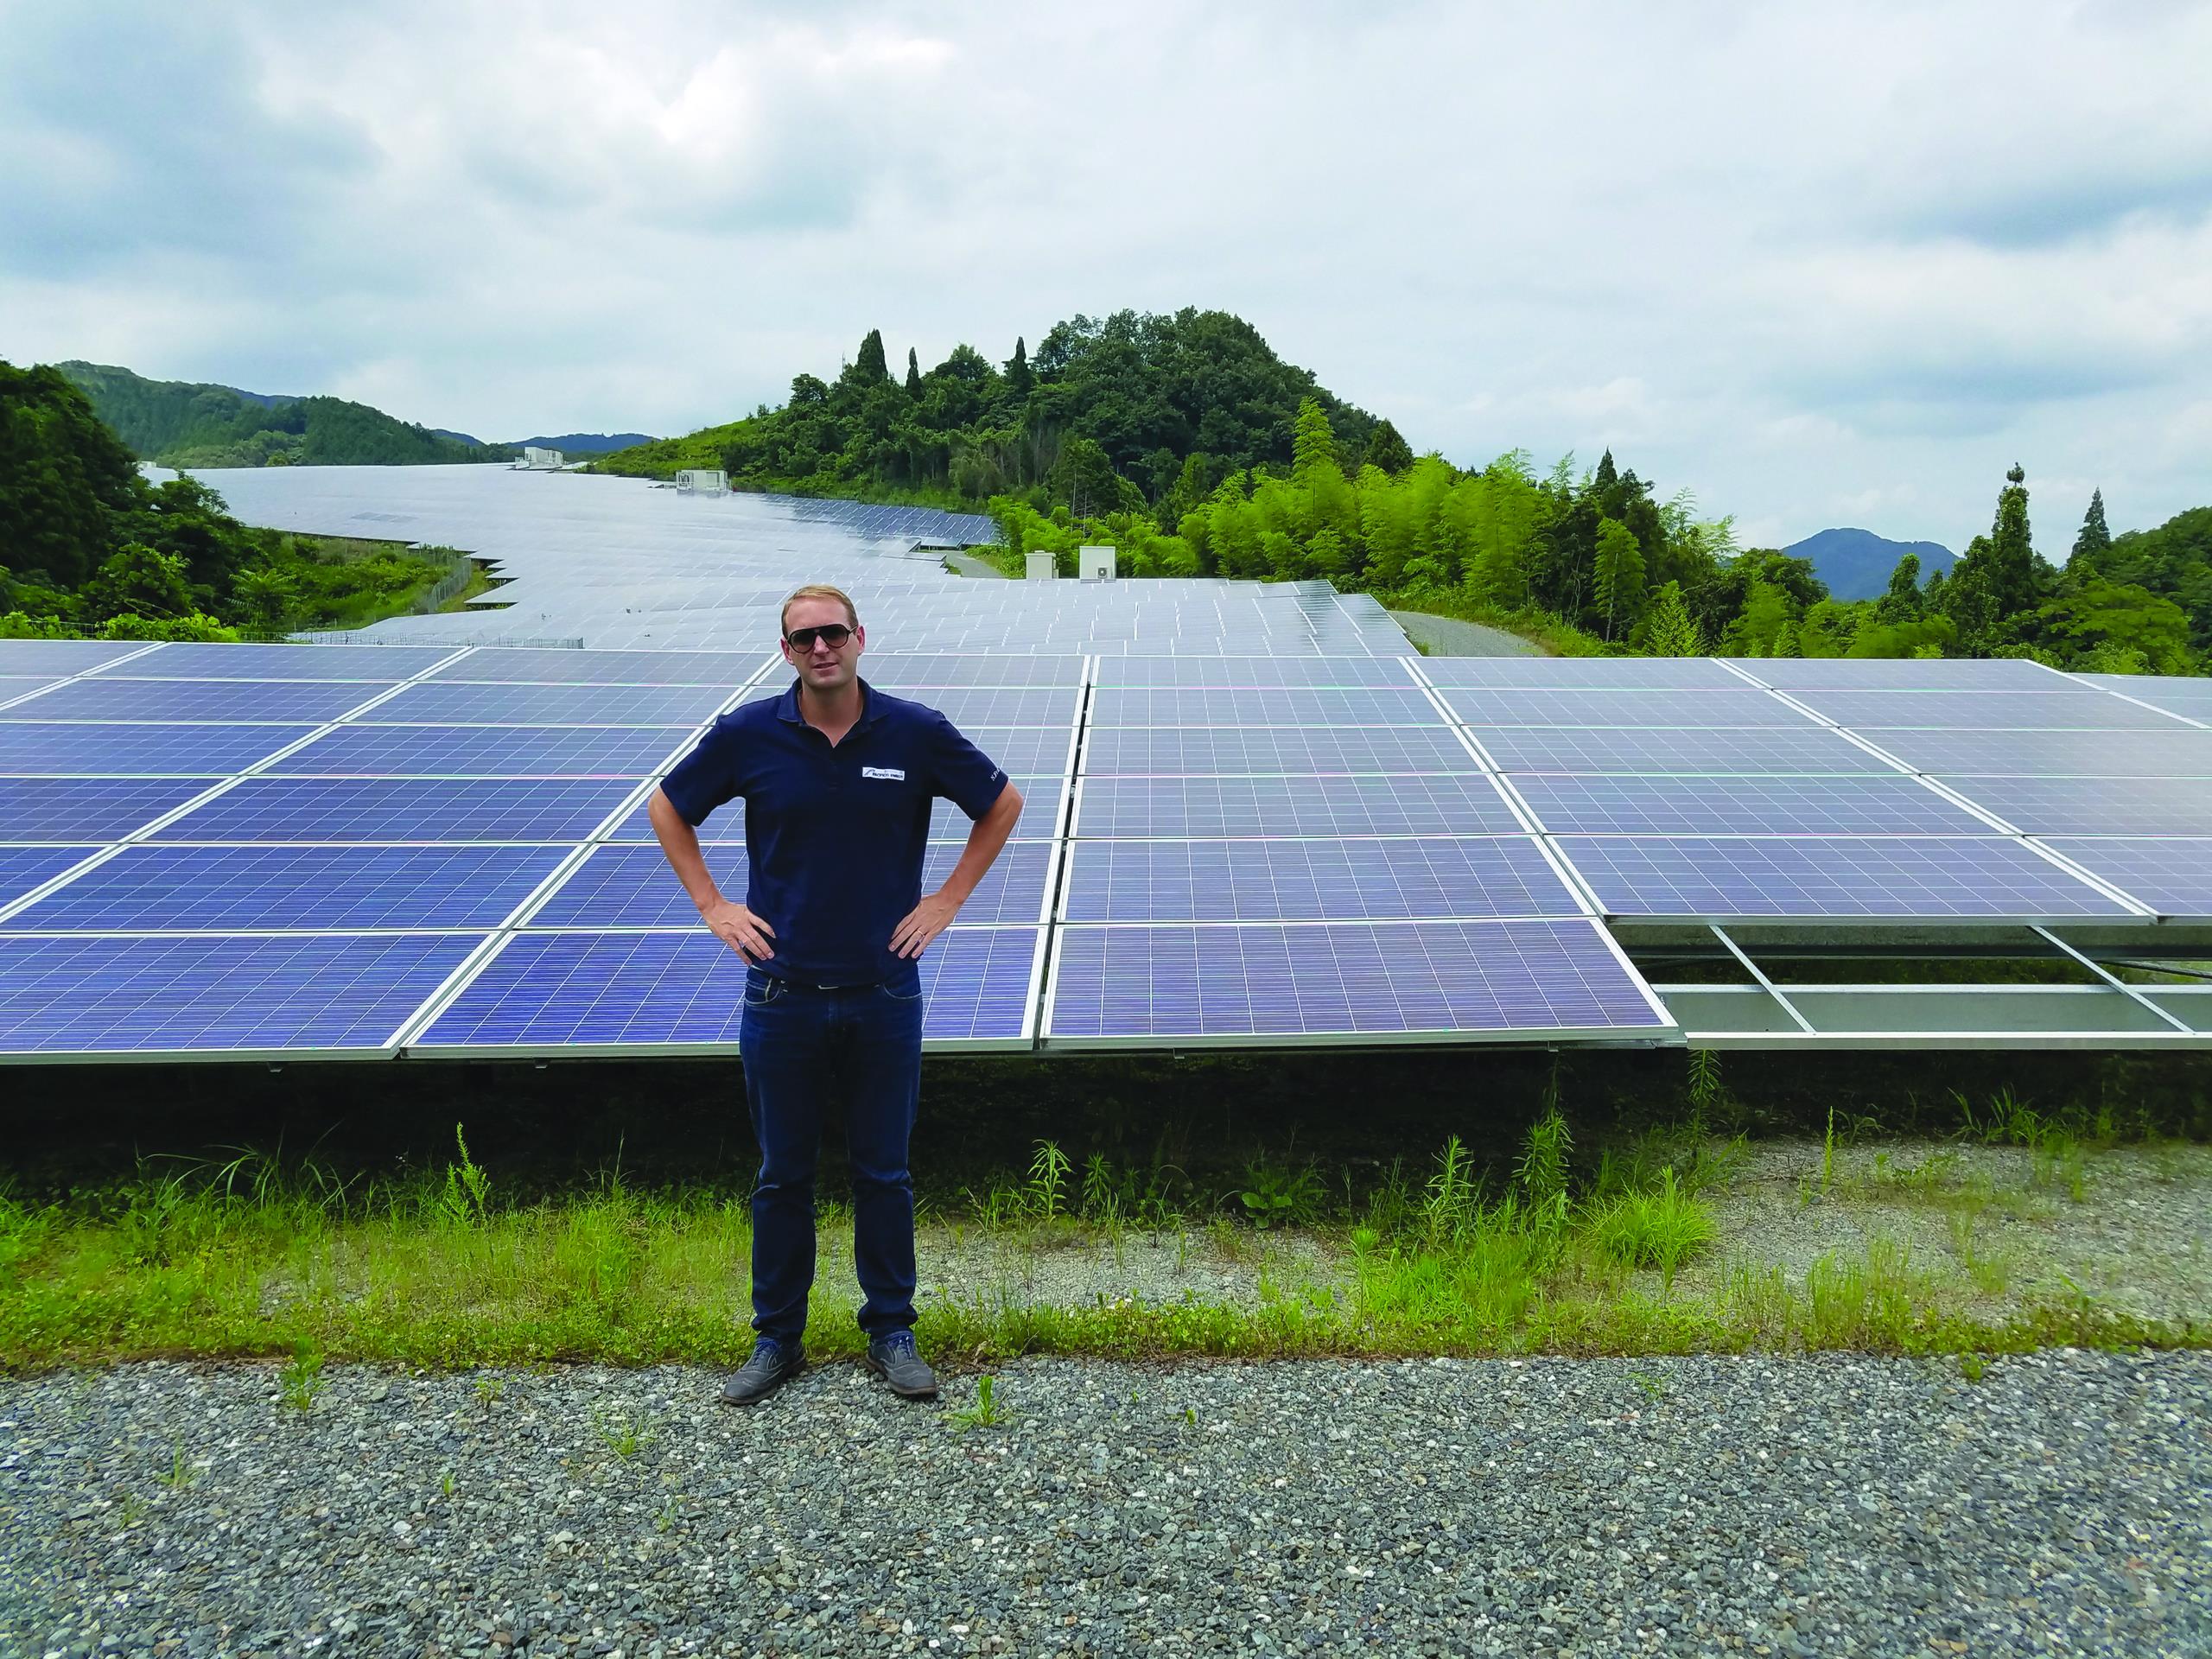 Nate Franklin, MD of Pacifico Energy, posing in front of solar panels at the Sakuto solar PV plant